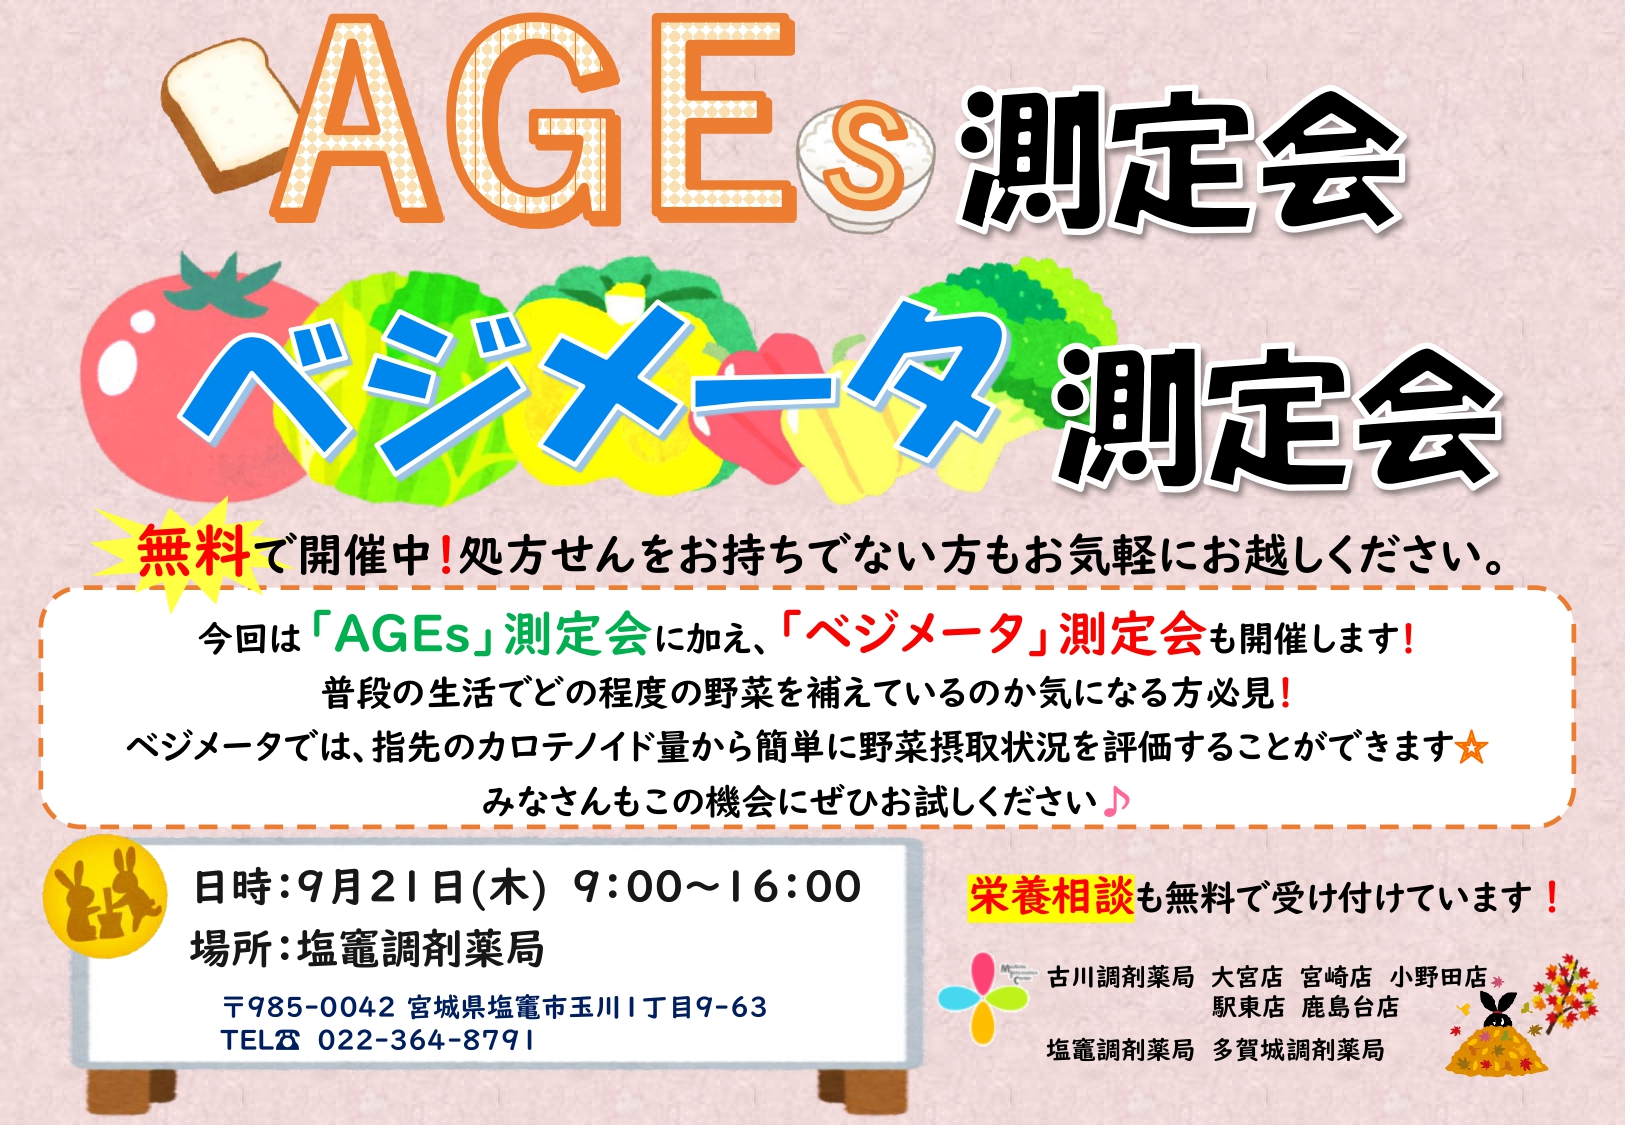 AGEs測定会＆べジメータ測定会　告知用紙(2023.9月 塩竈)_page-0001